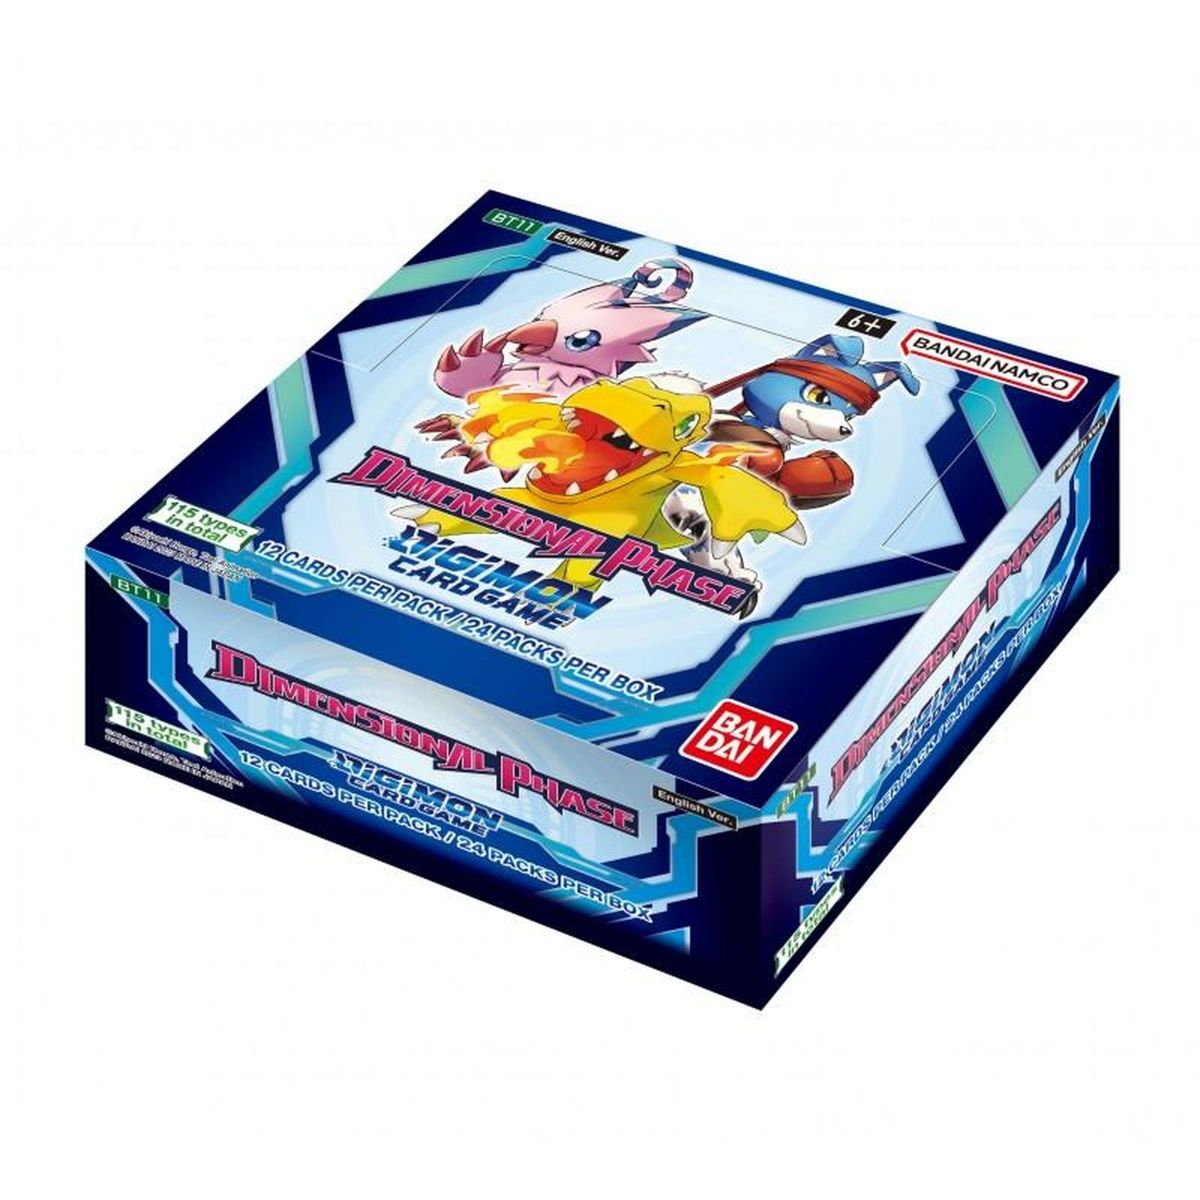 Digimon - Display - Box of 24 Boosters - BT11 Dimensional Phase - EN